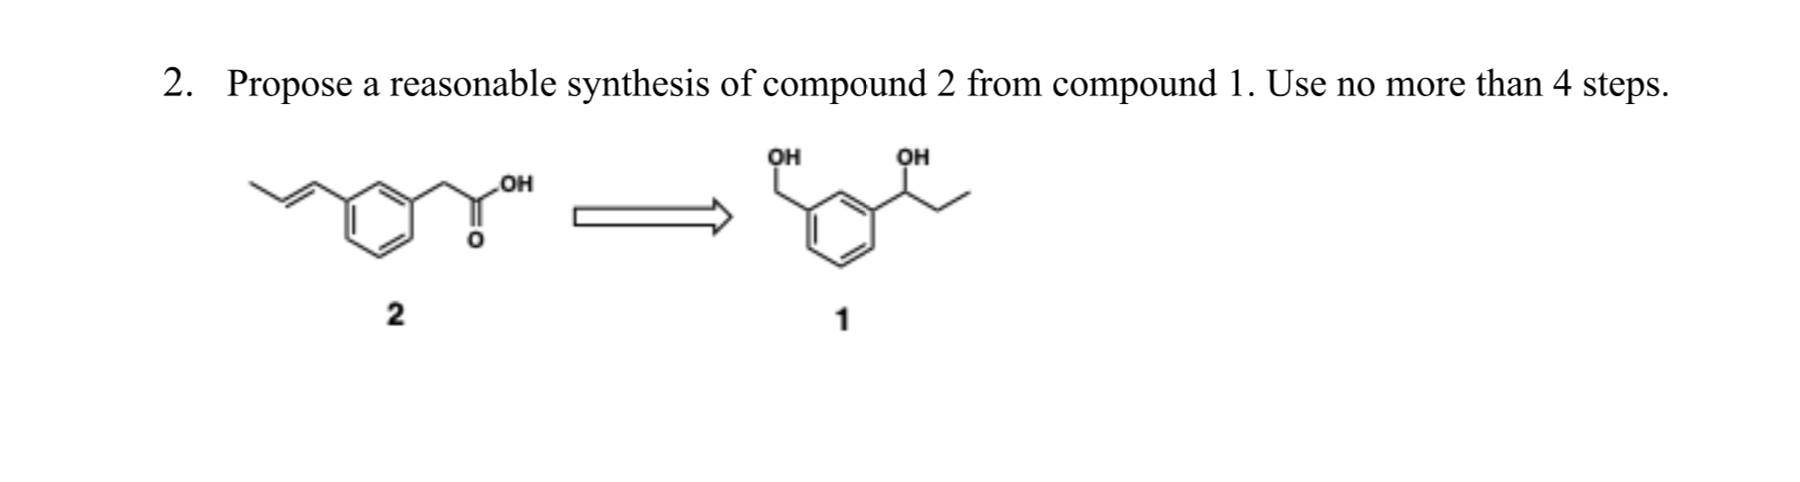 2. Propose a reasonable synthesis of compound 2 from compound 1. Use no more than 4 steps.
Он
он
он
2
